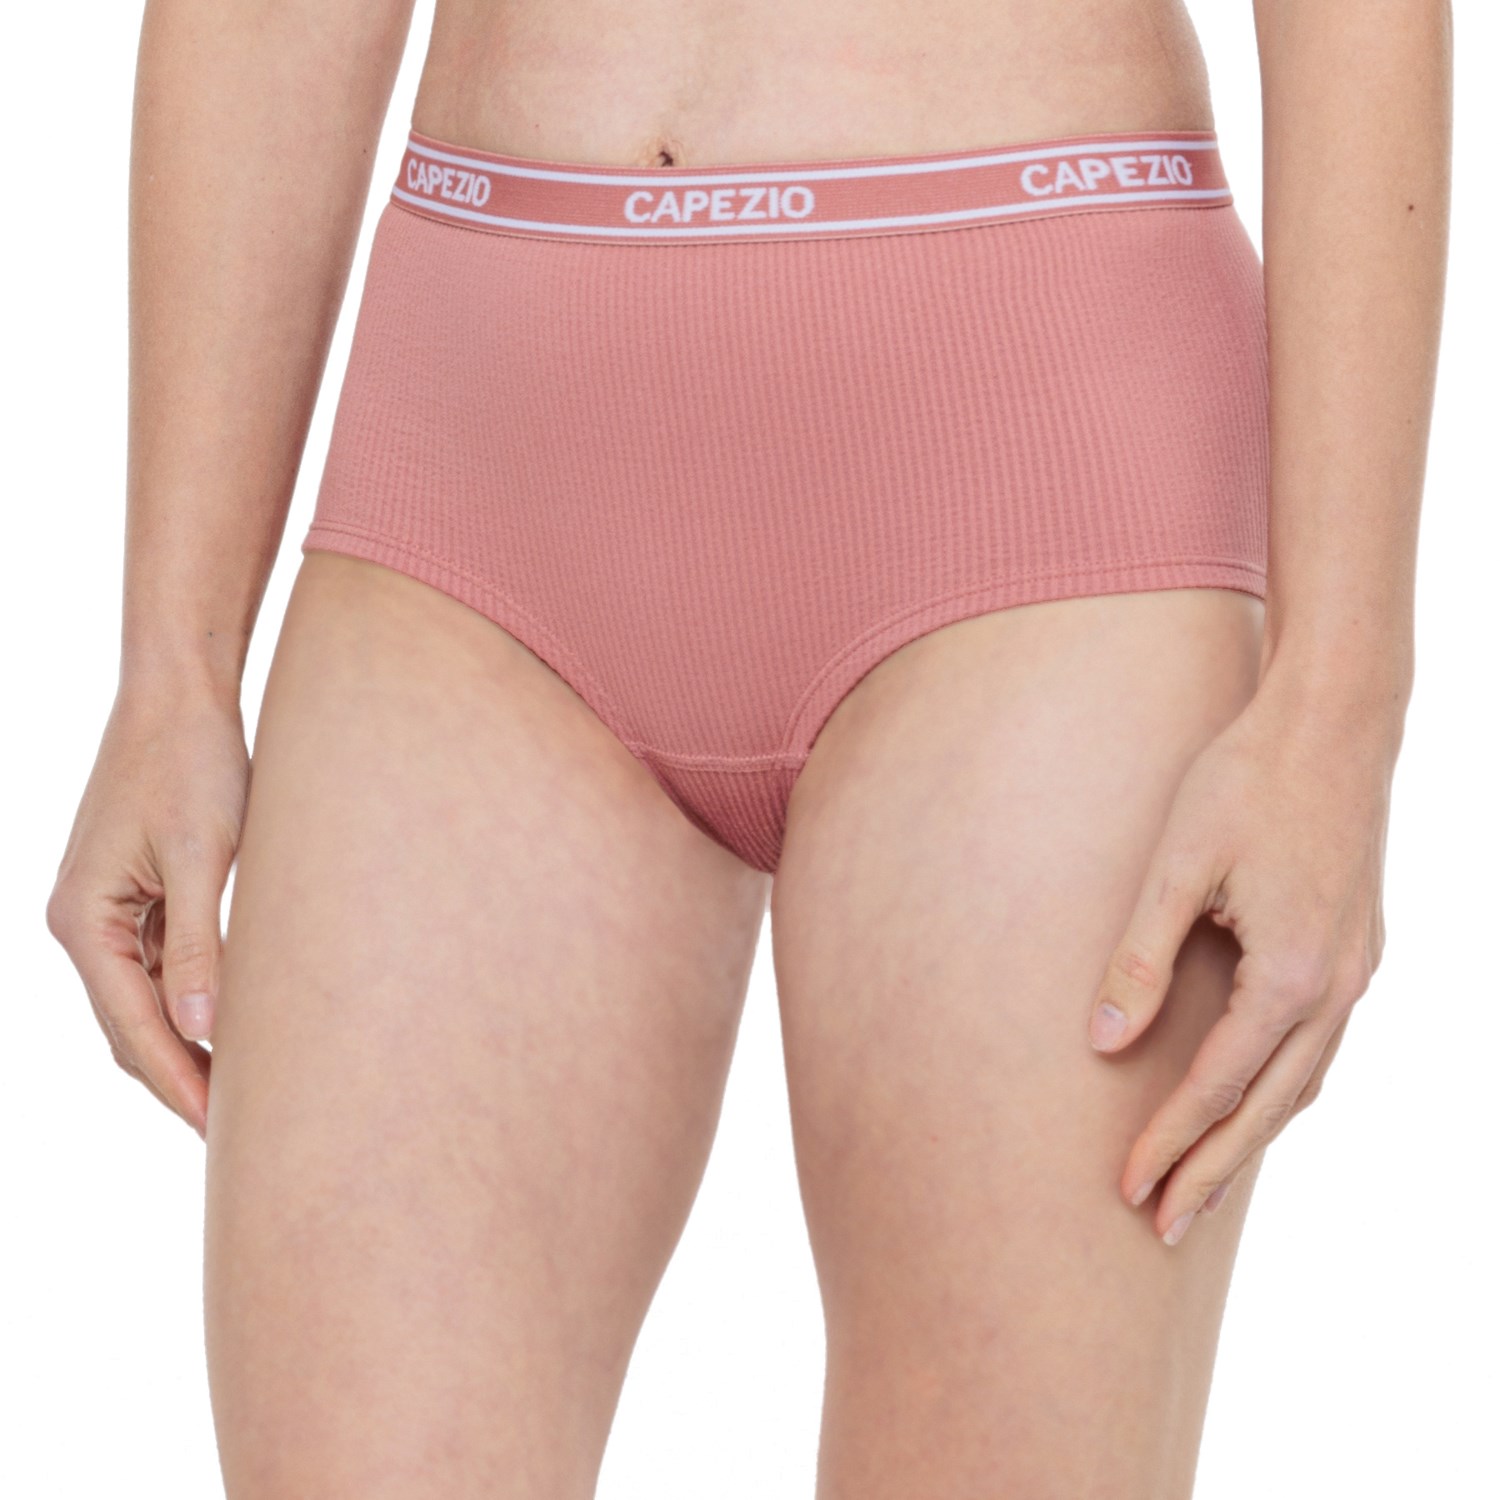 CAPEZIO Ribbed Seamless Shortie Panties - 3-Pack, Boy Shorts